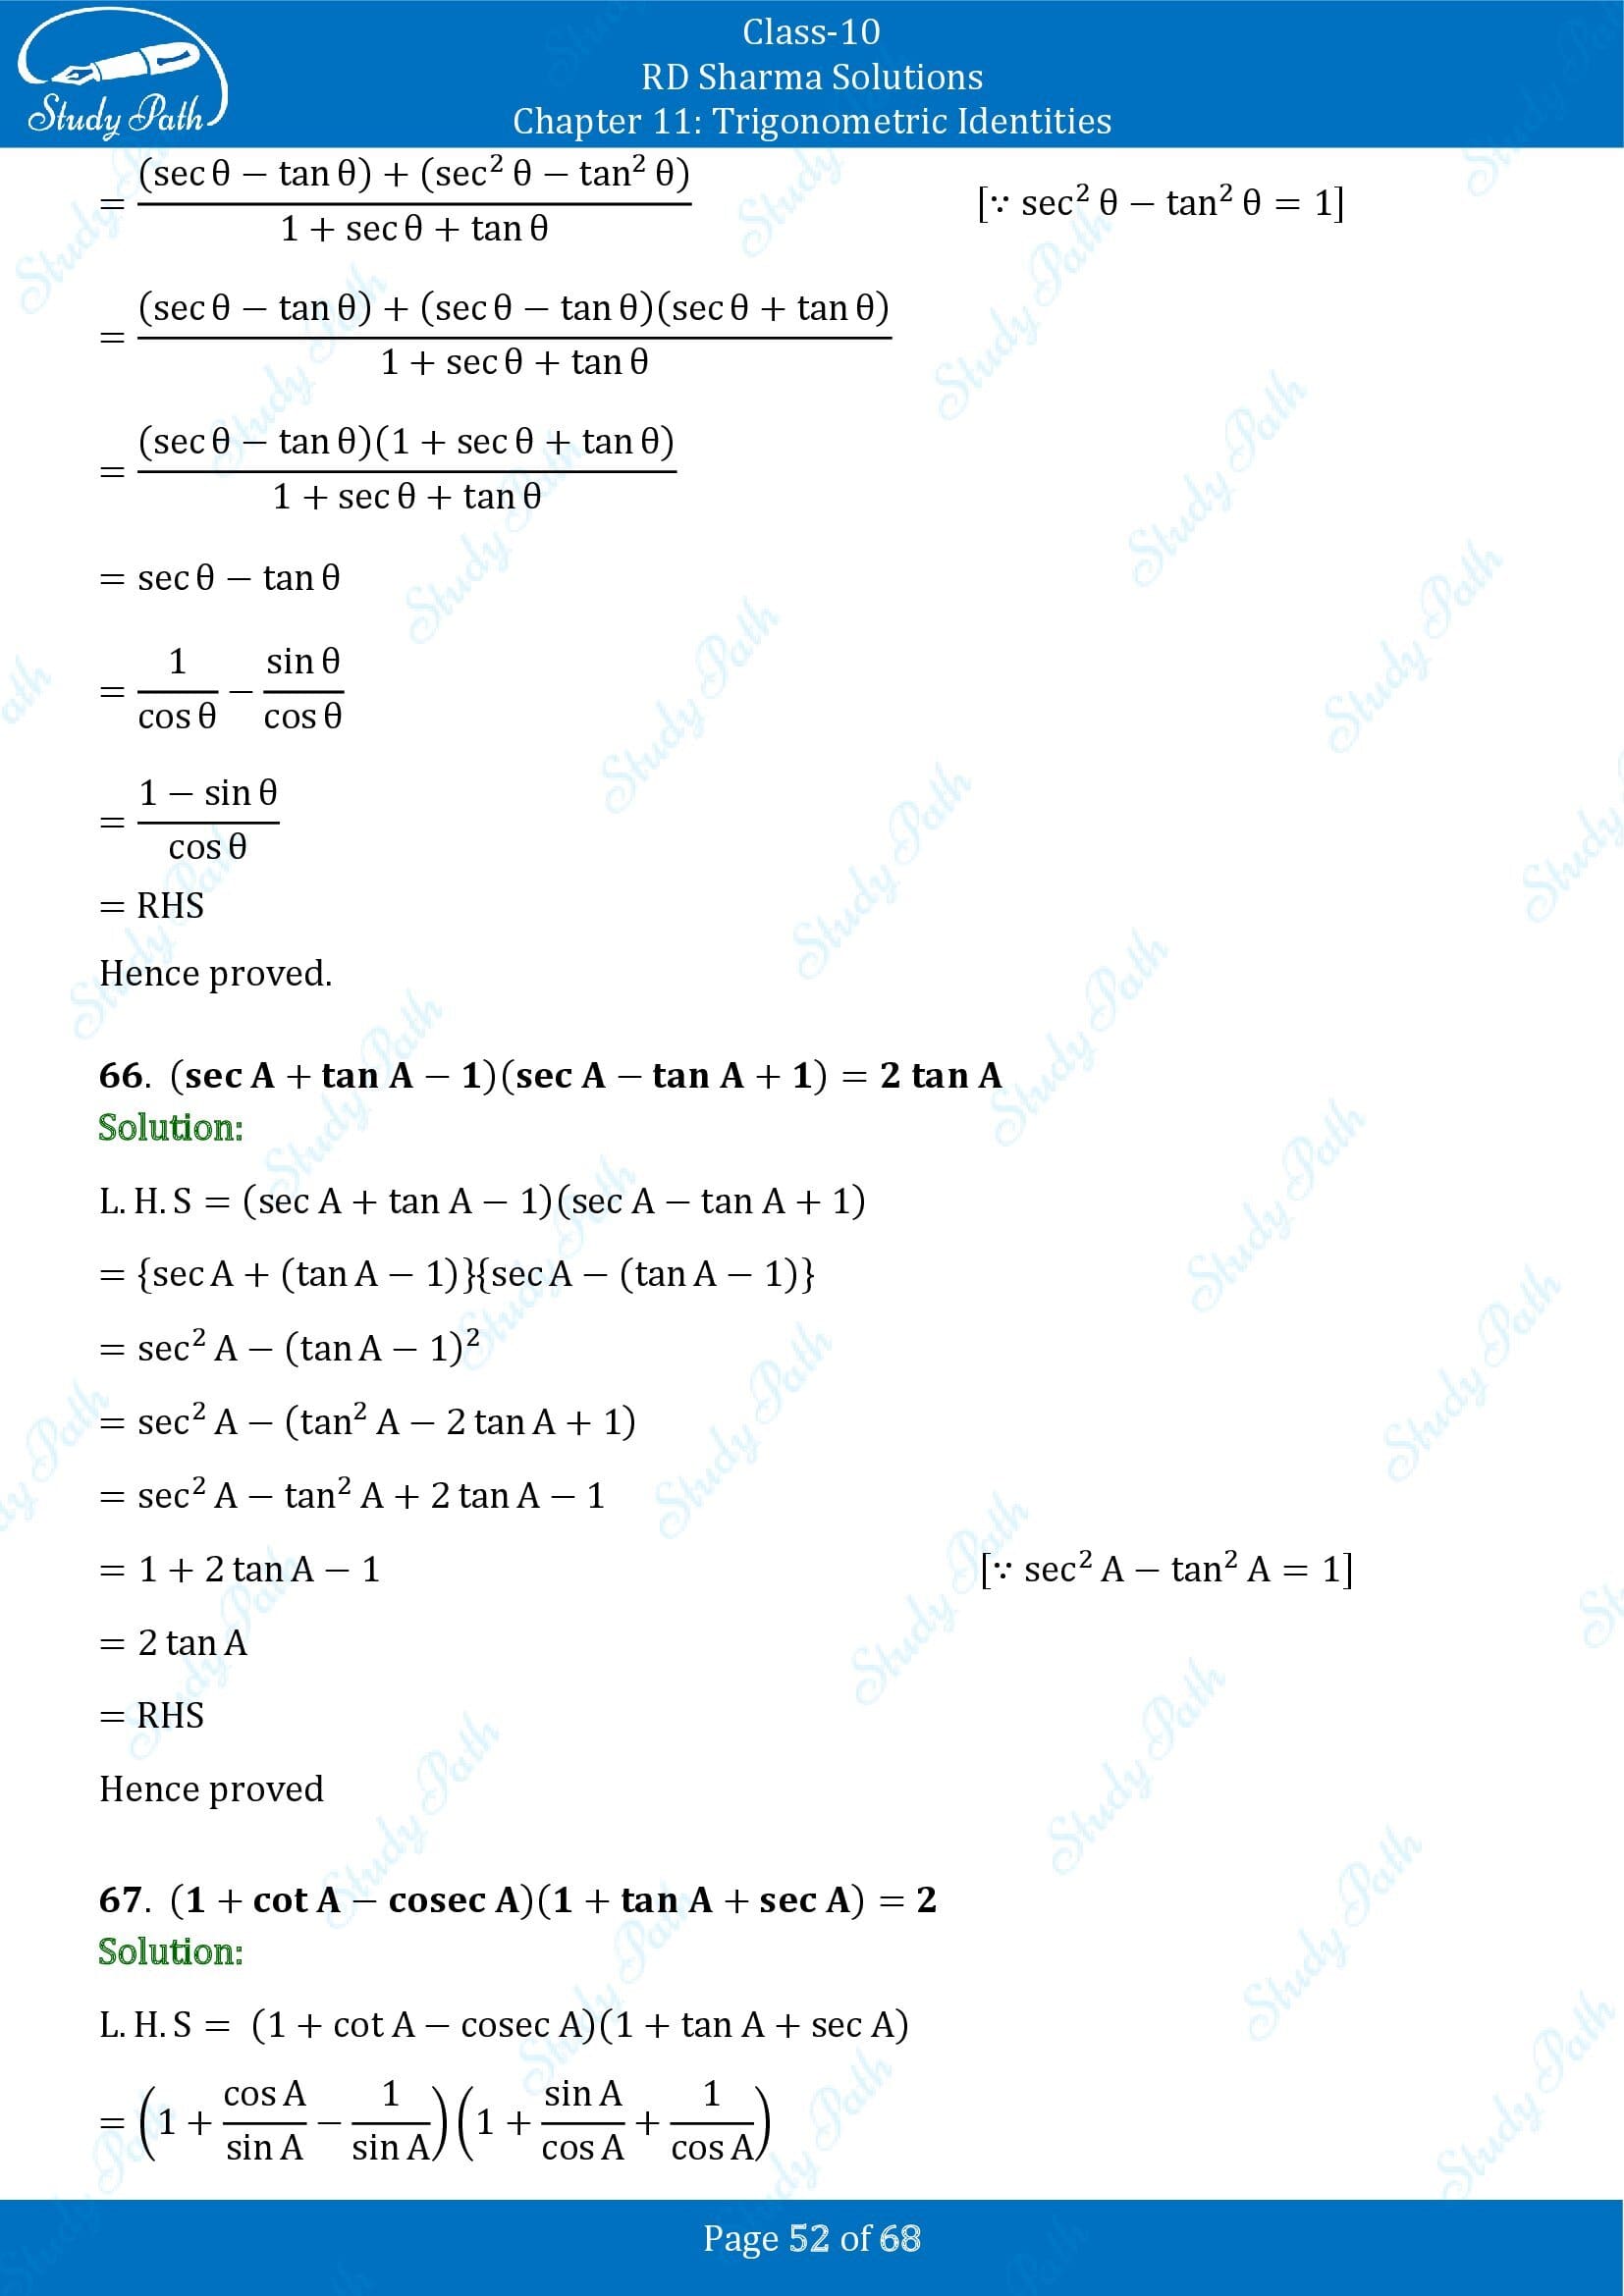 RD Sharma Solutions Class 10 Chapter 11 Trigonometric Identities Exercise 11.1 00052